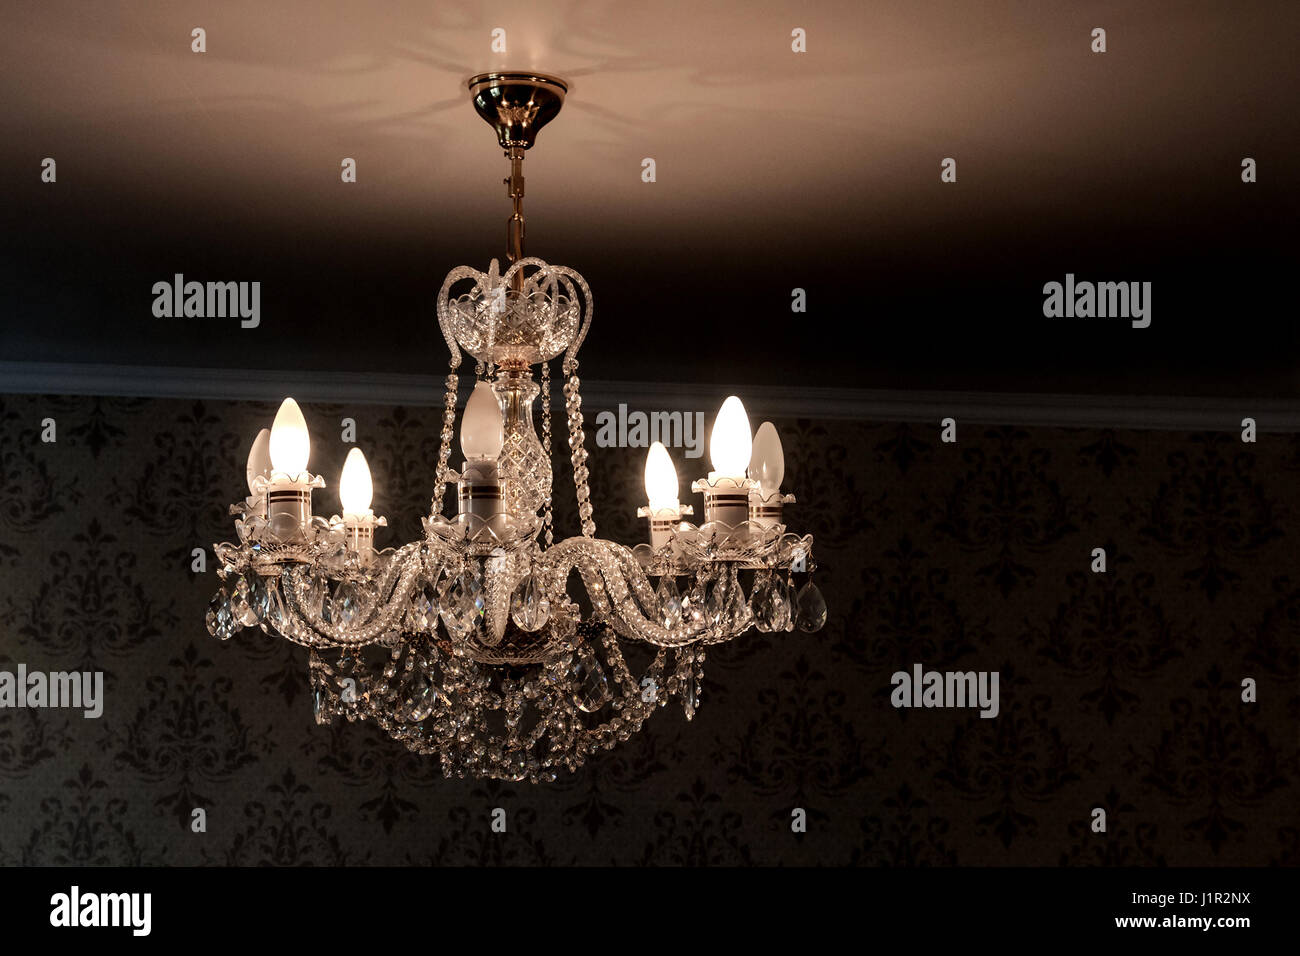 crystal chandelier shines hanging from the ceiling in the room Stock Photo